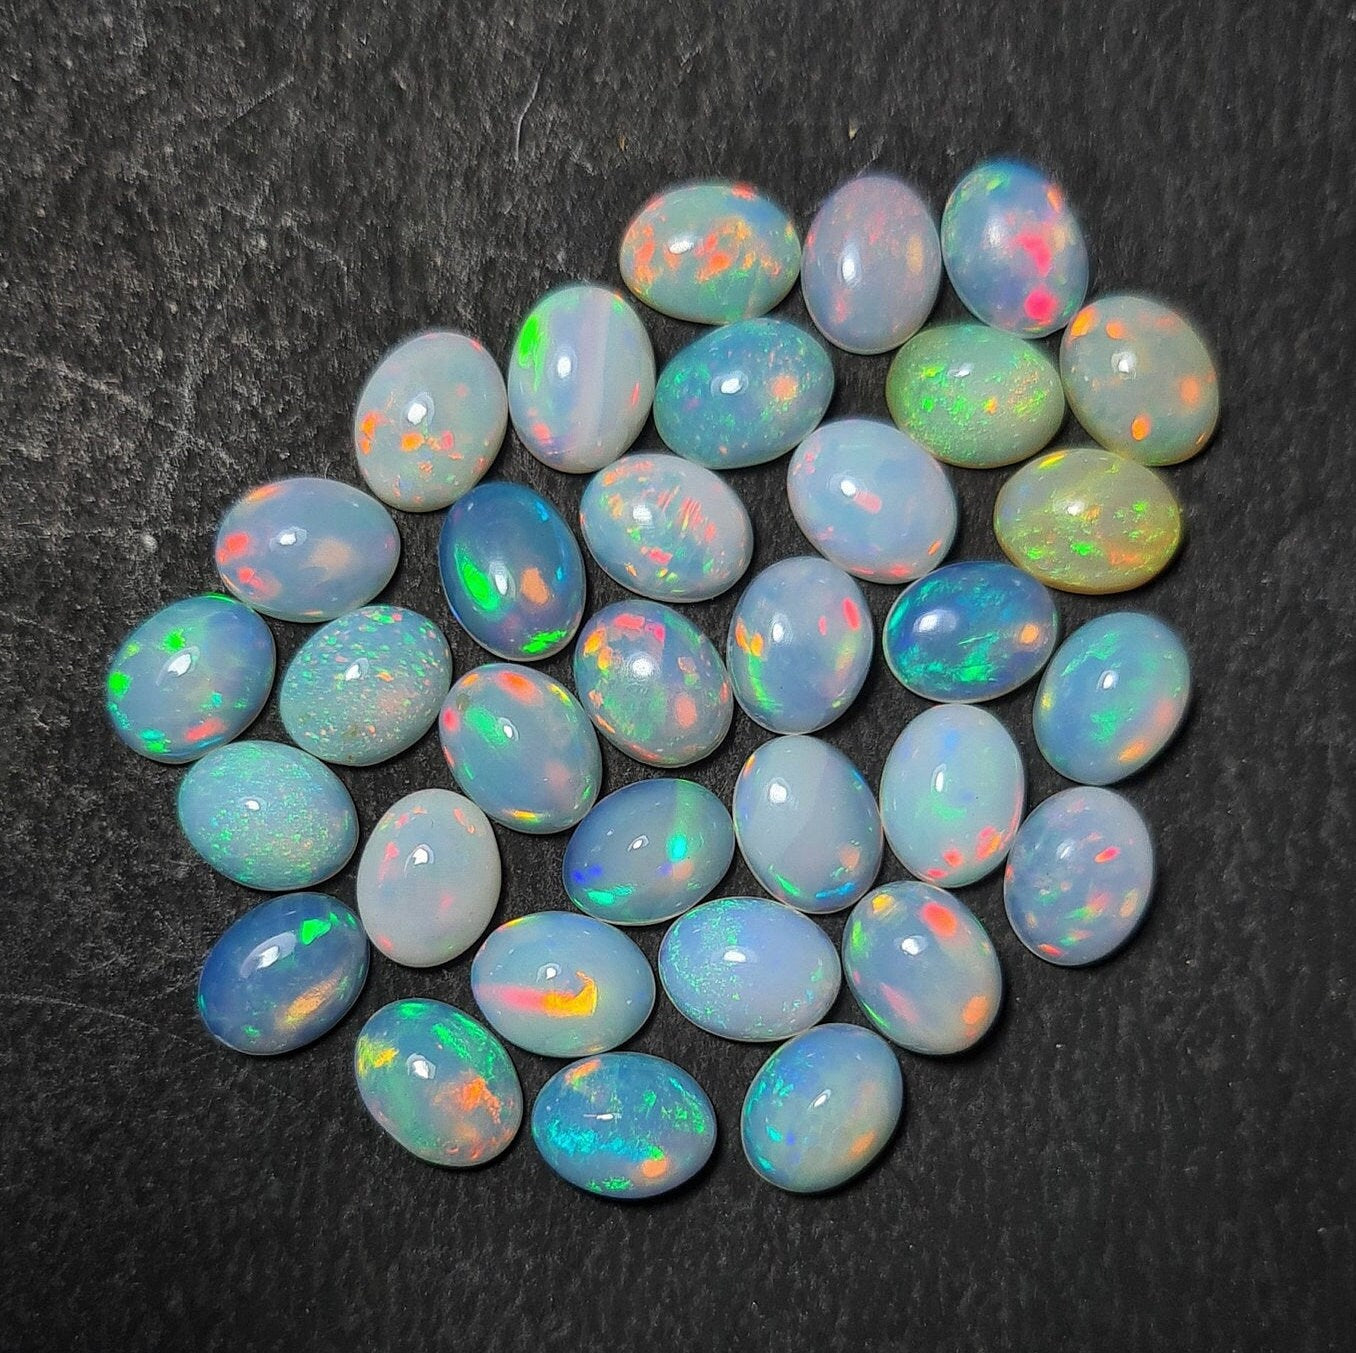 Natural Ethiopian Opal 7x10 mm Oval Gemstone Cabochon, Calibrated Opal Stone, Multi Fire Opal Loose Stone For Jewelry Making.